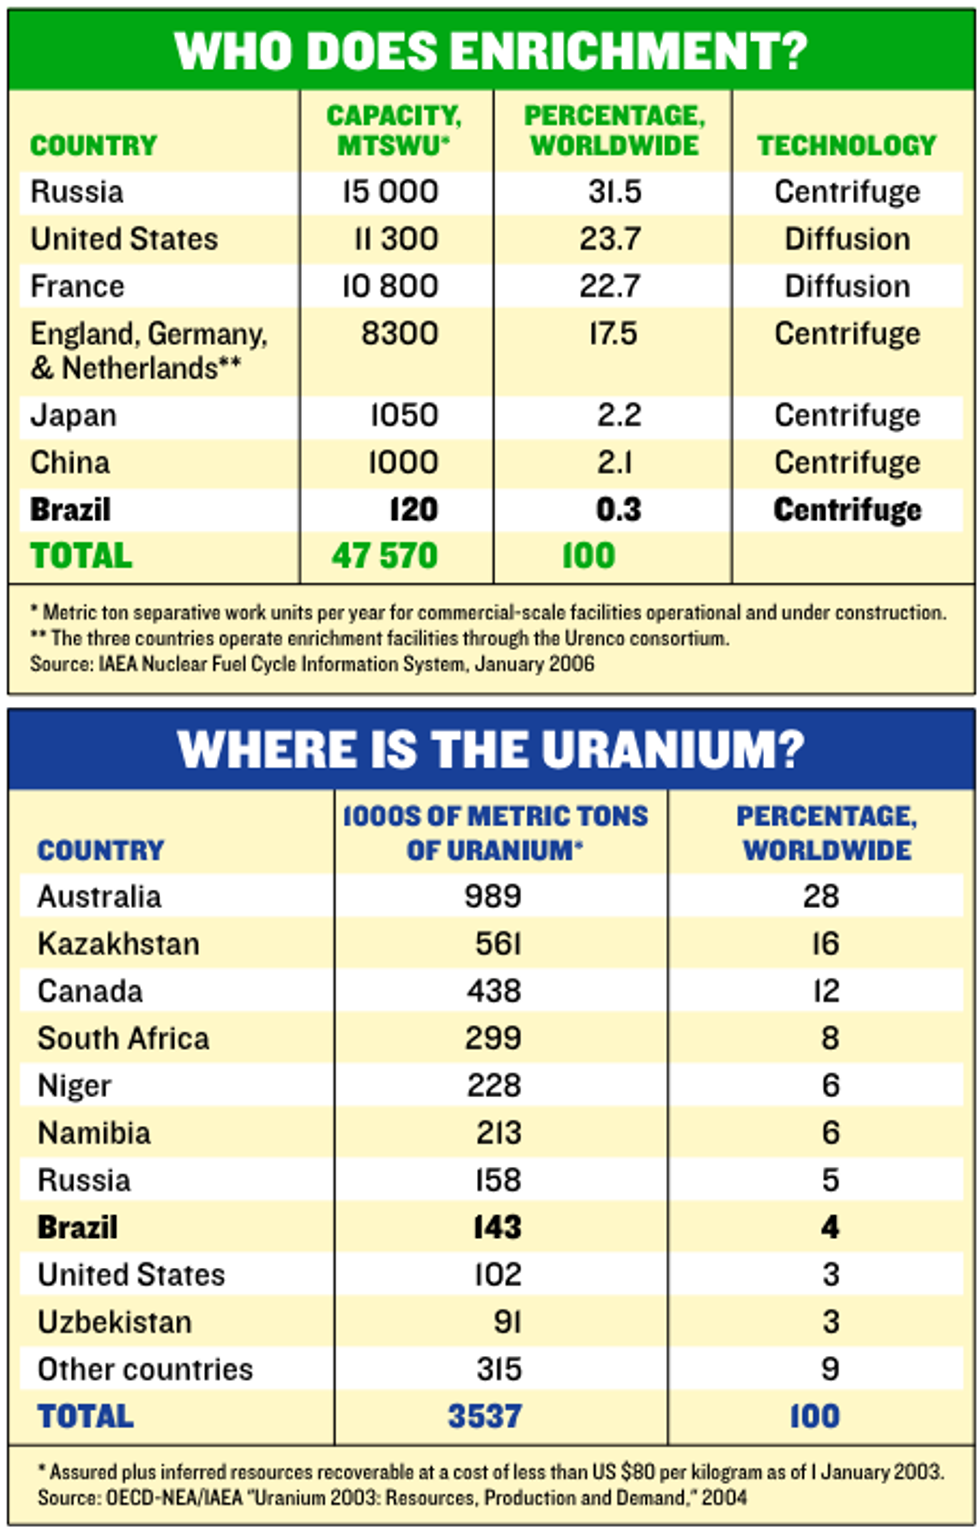 Uranium reserves and enrichment capability by country